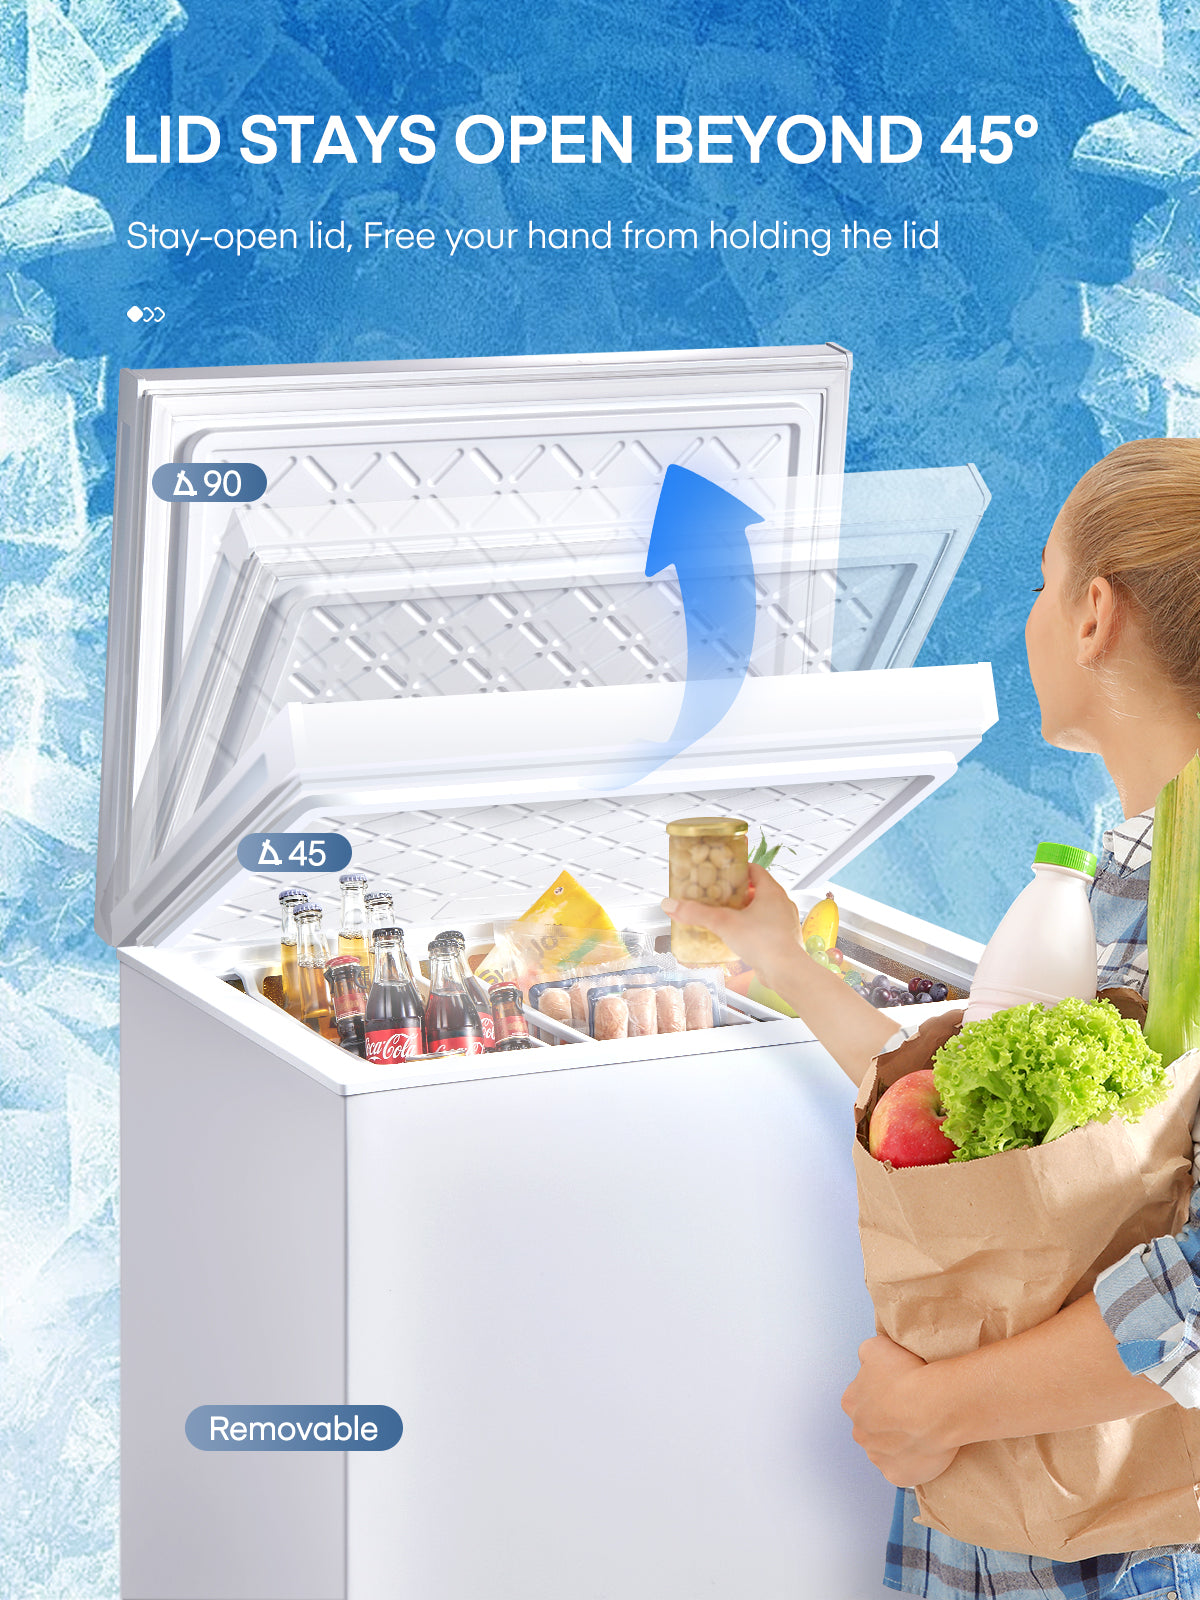 Deep Freezer 7 Cubic Feet, Chest Deep Freezer with 3 Removable Storage Baskets, Compact Small Freezers